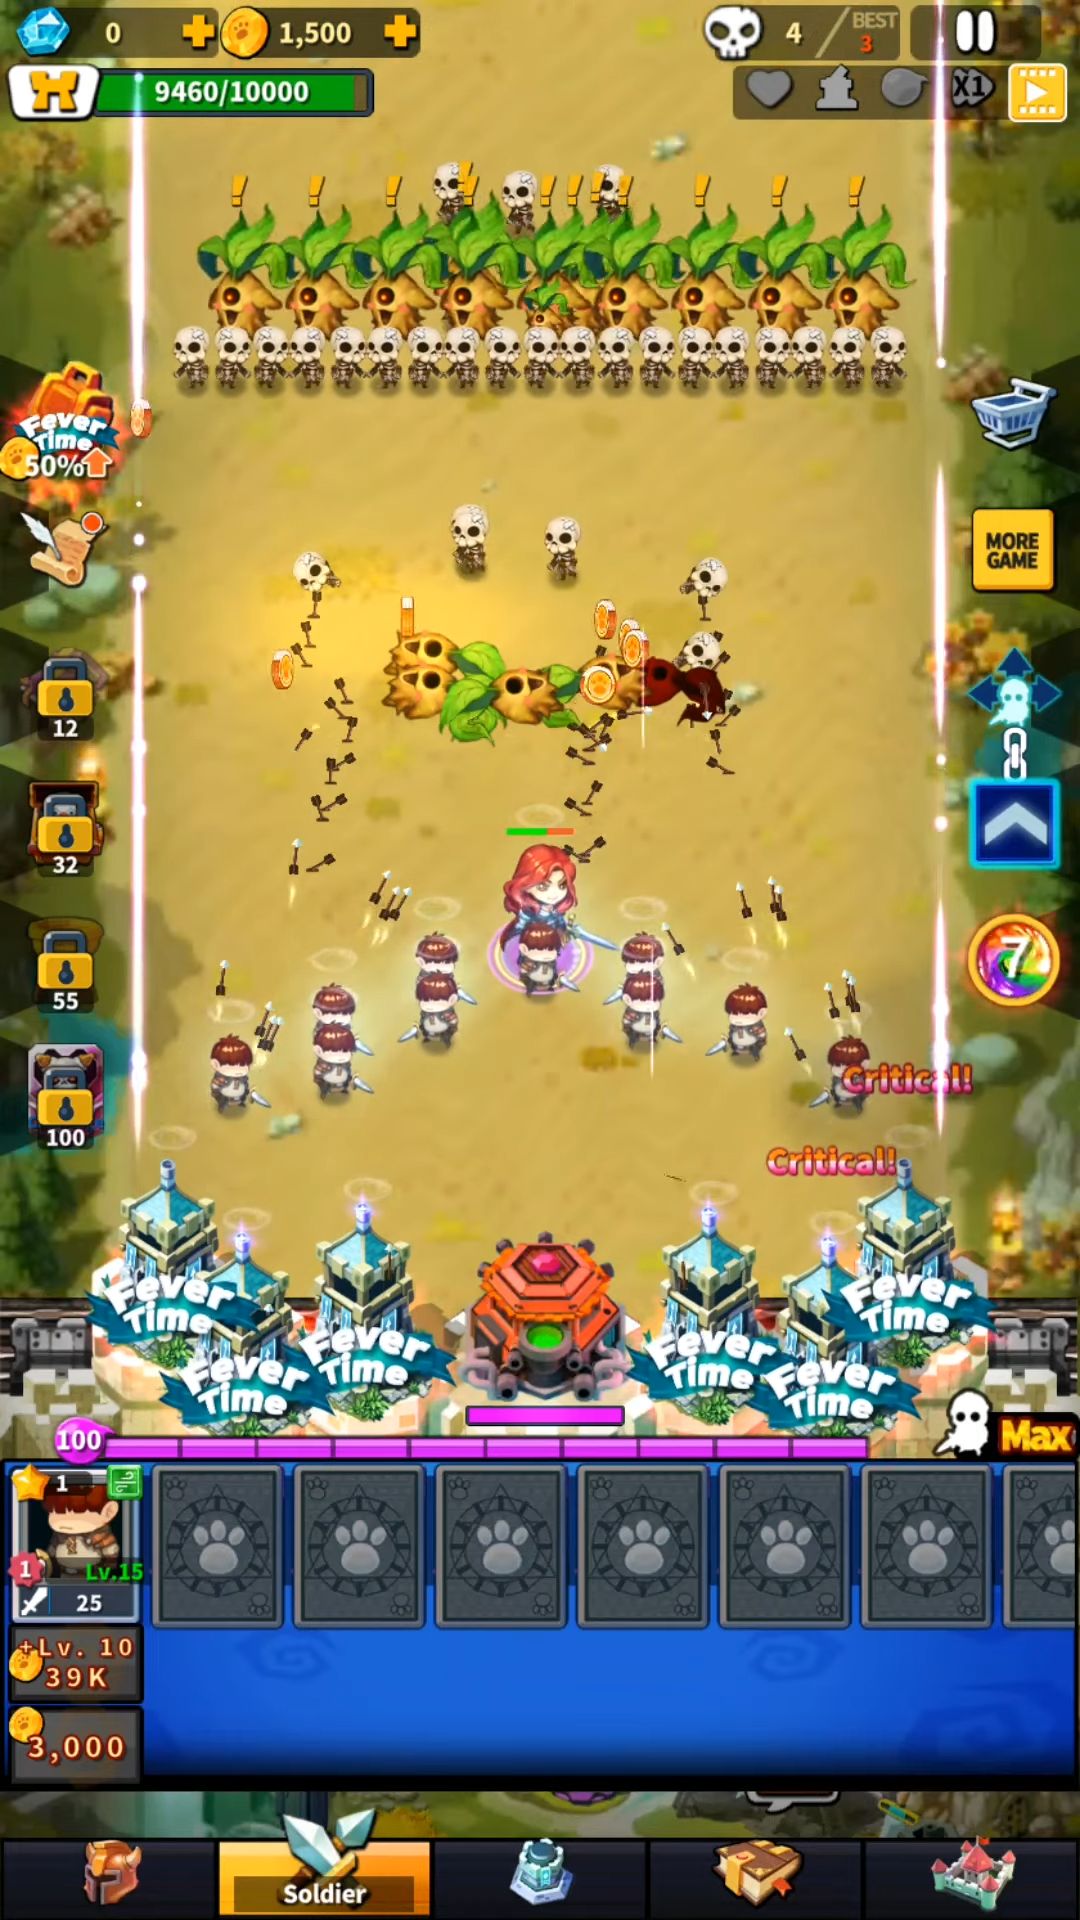 Gameplay of the Hero Defense Castle for Android phone or tablet.